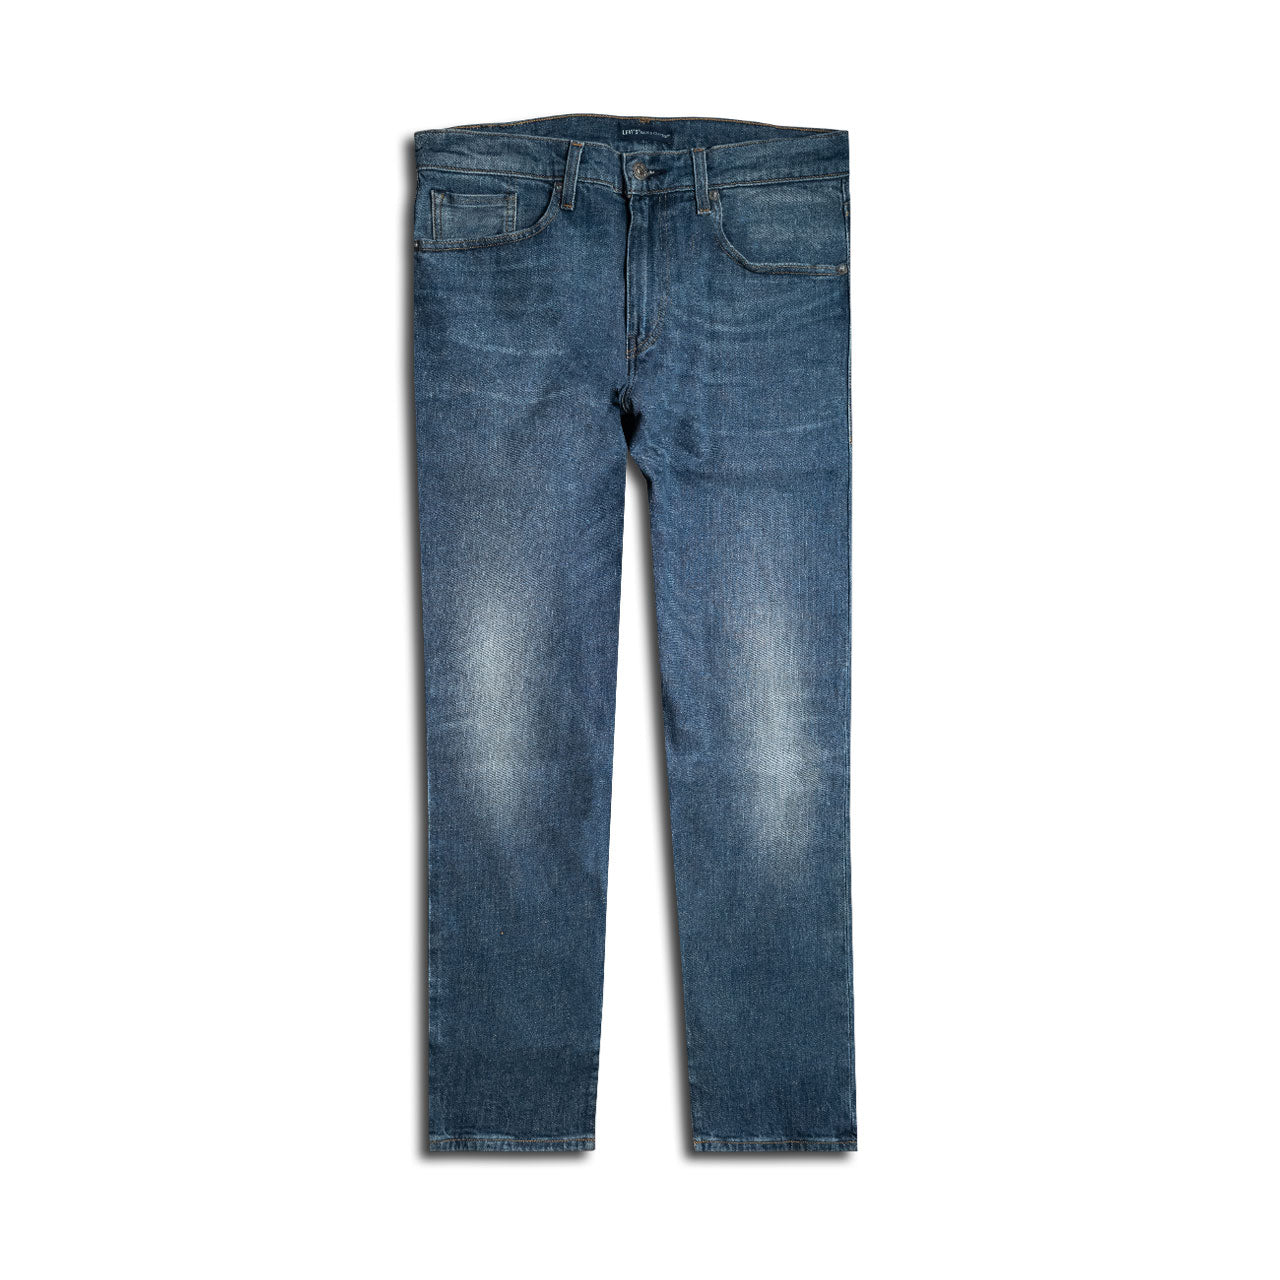 Levi's Made & Crafted 502 Selvedge Jeans | Uncrate